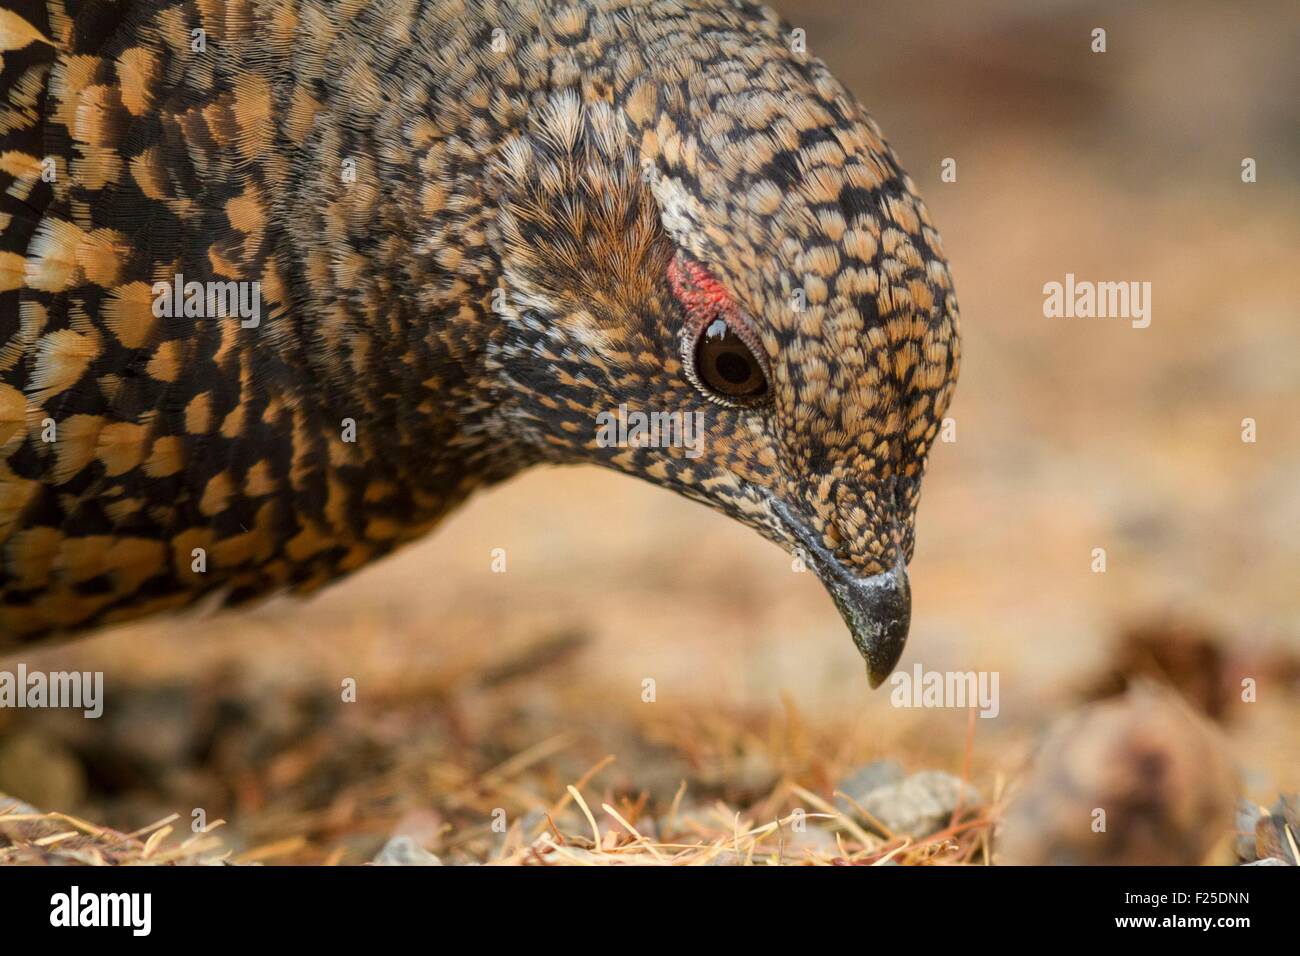 Canada, Quebec province, Charlevoix, Great Gardens Conservation Park, Canada Grouse female (Falcipennis canadensis) eating larch needles (Larix laricina) on the ground, autumn, tight portrait, IUCN LC Stock Photo